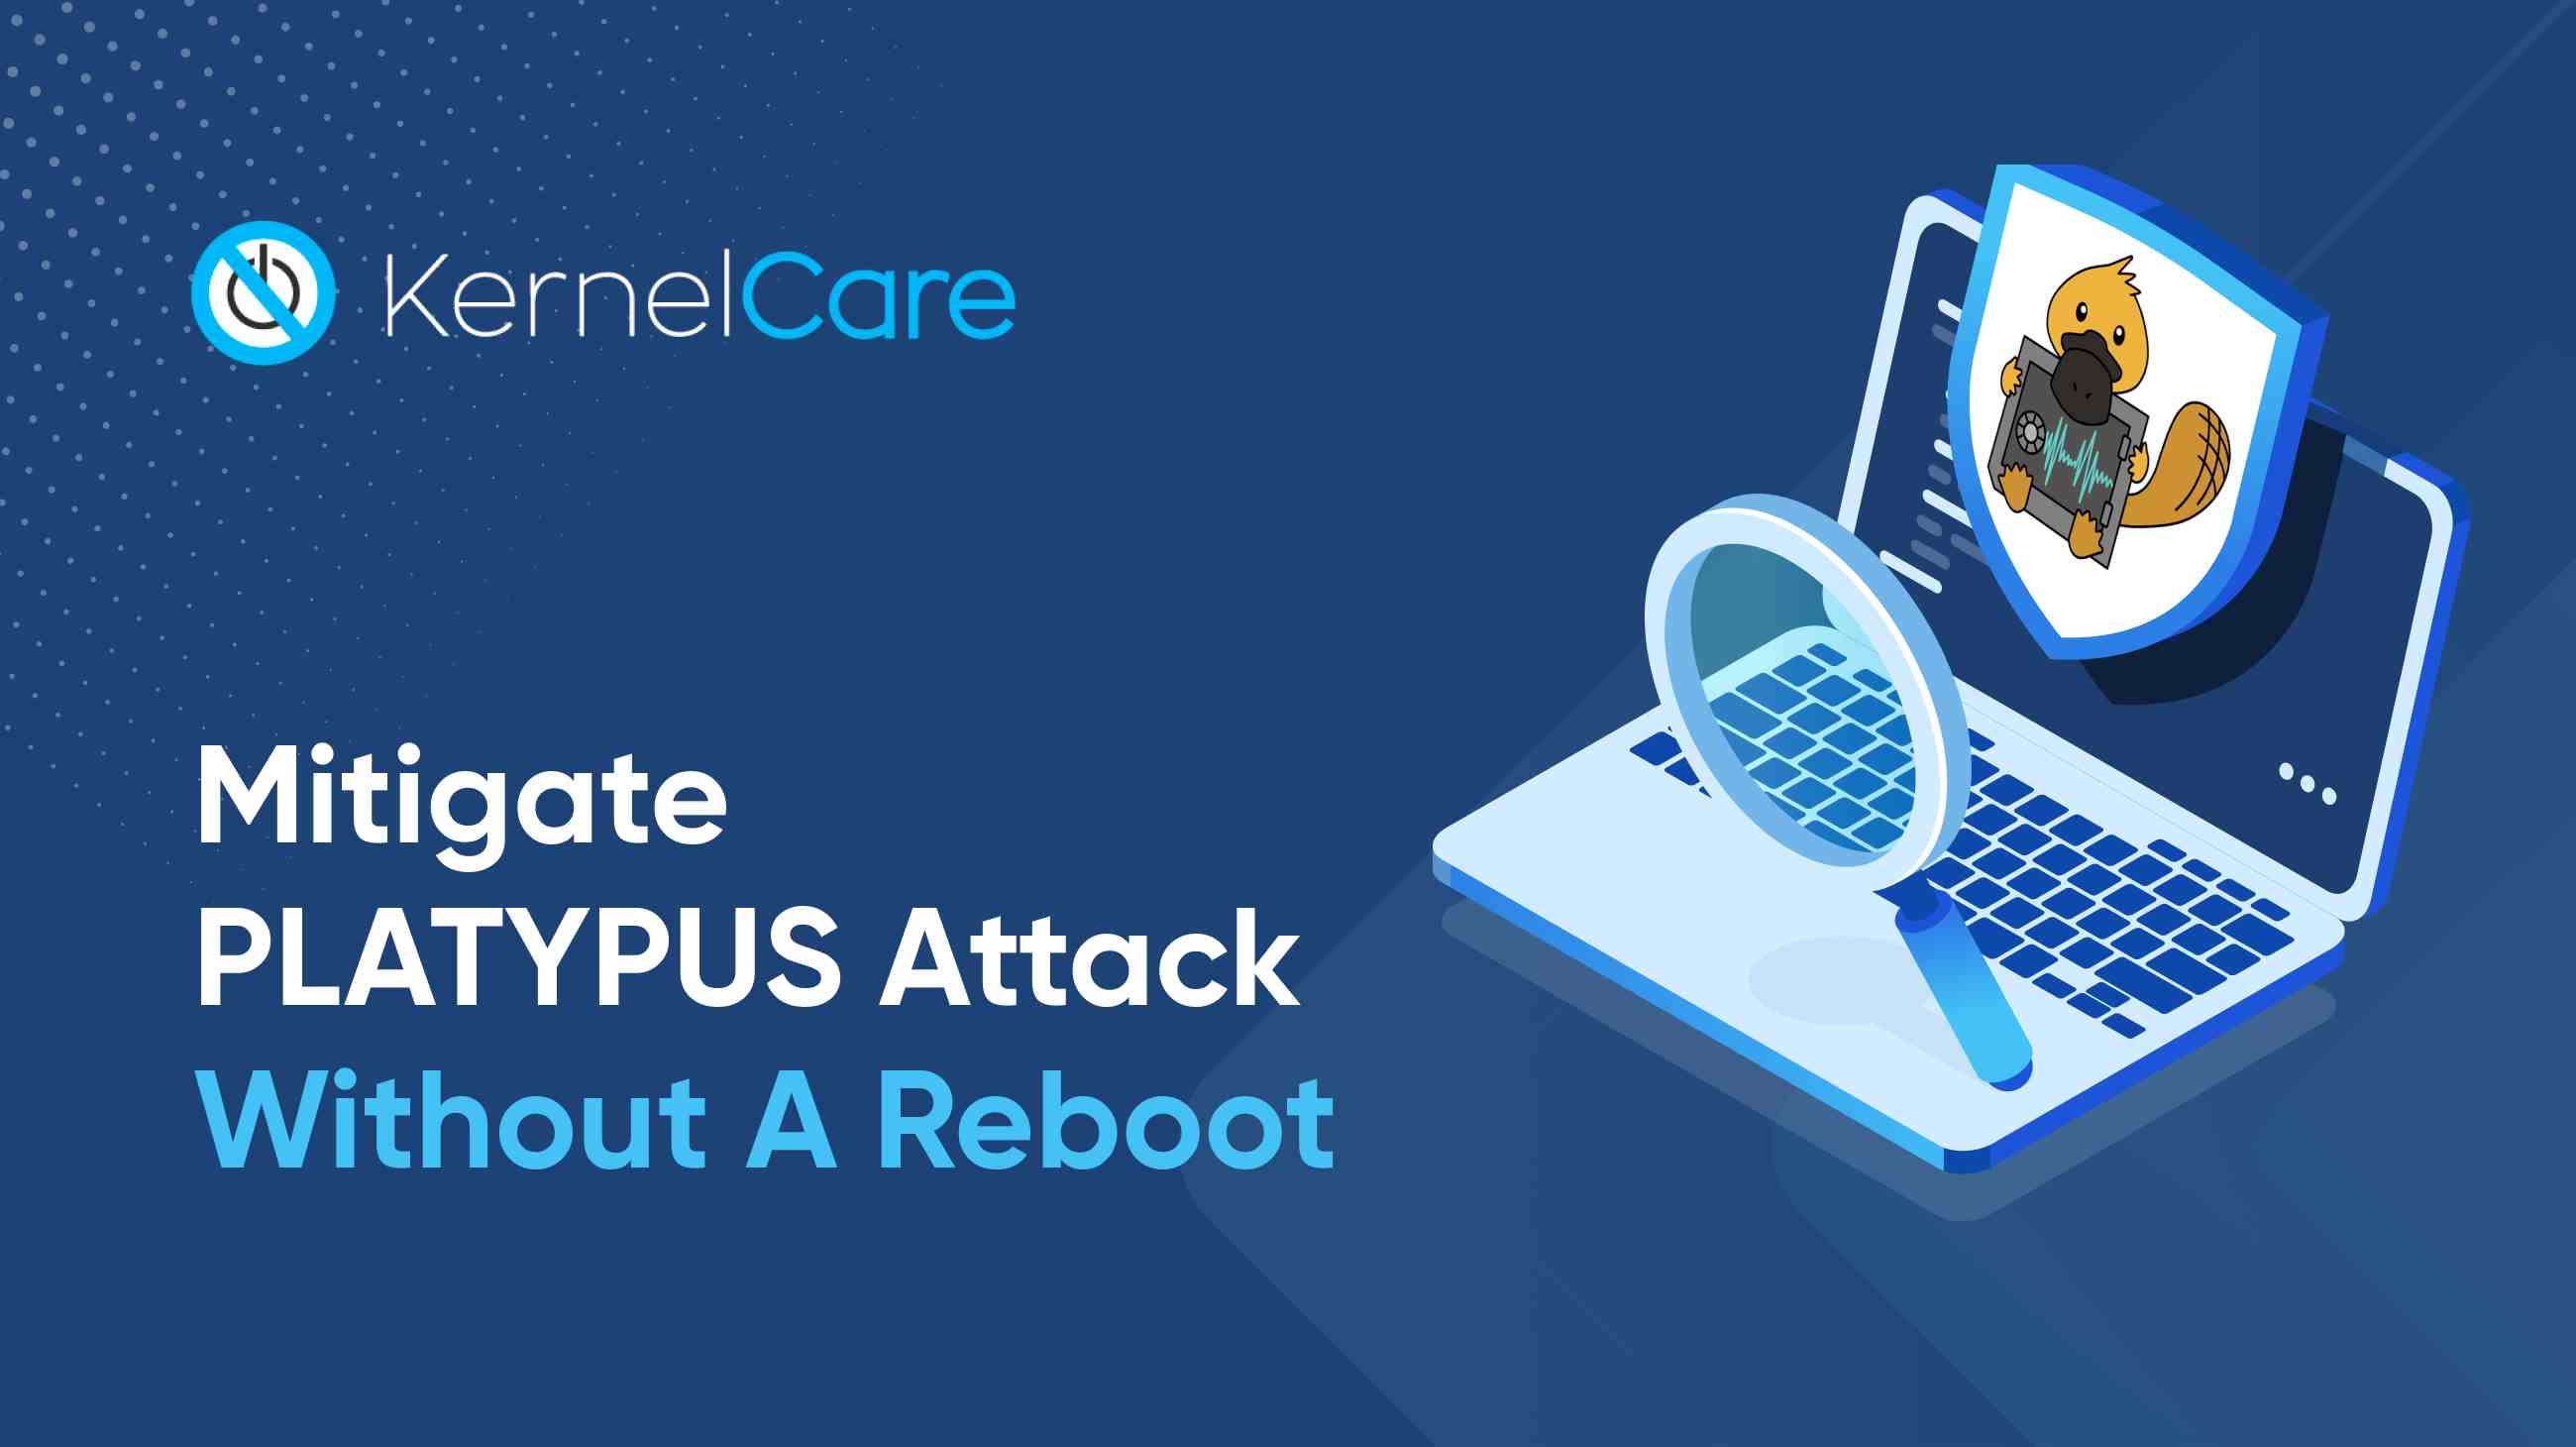 Mitigate PLATYPUS Attack Without A Reboot